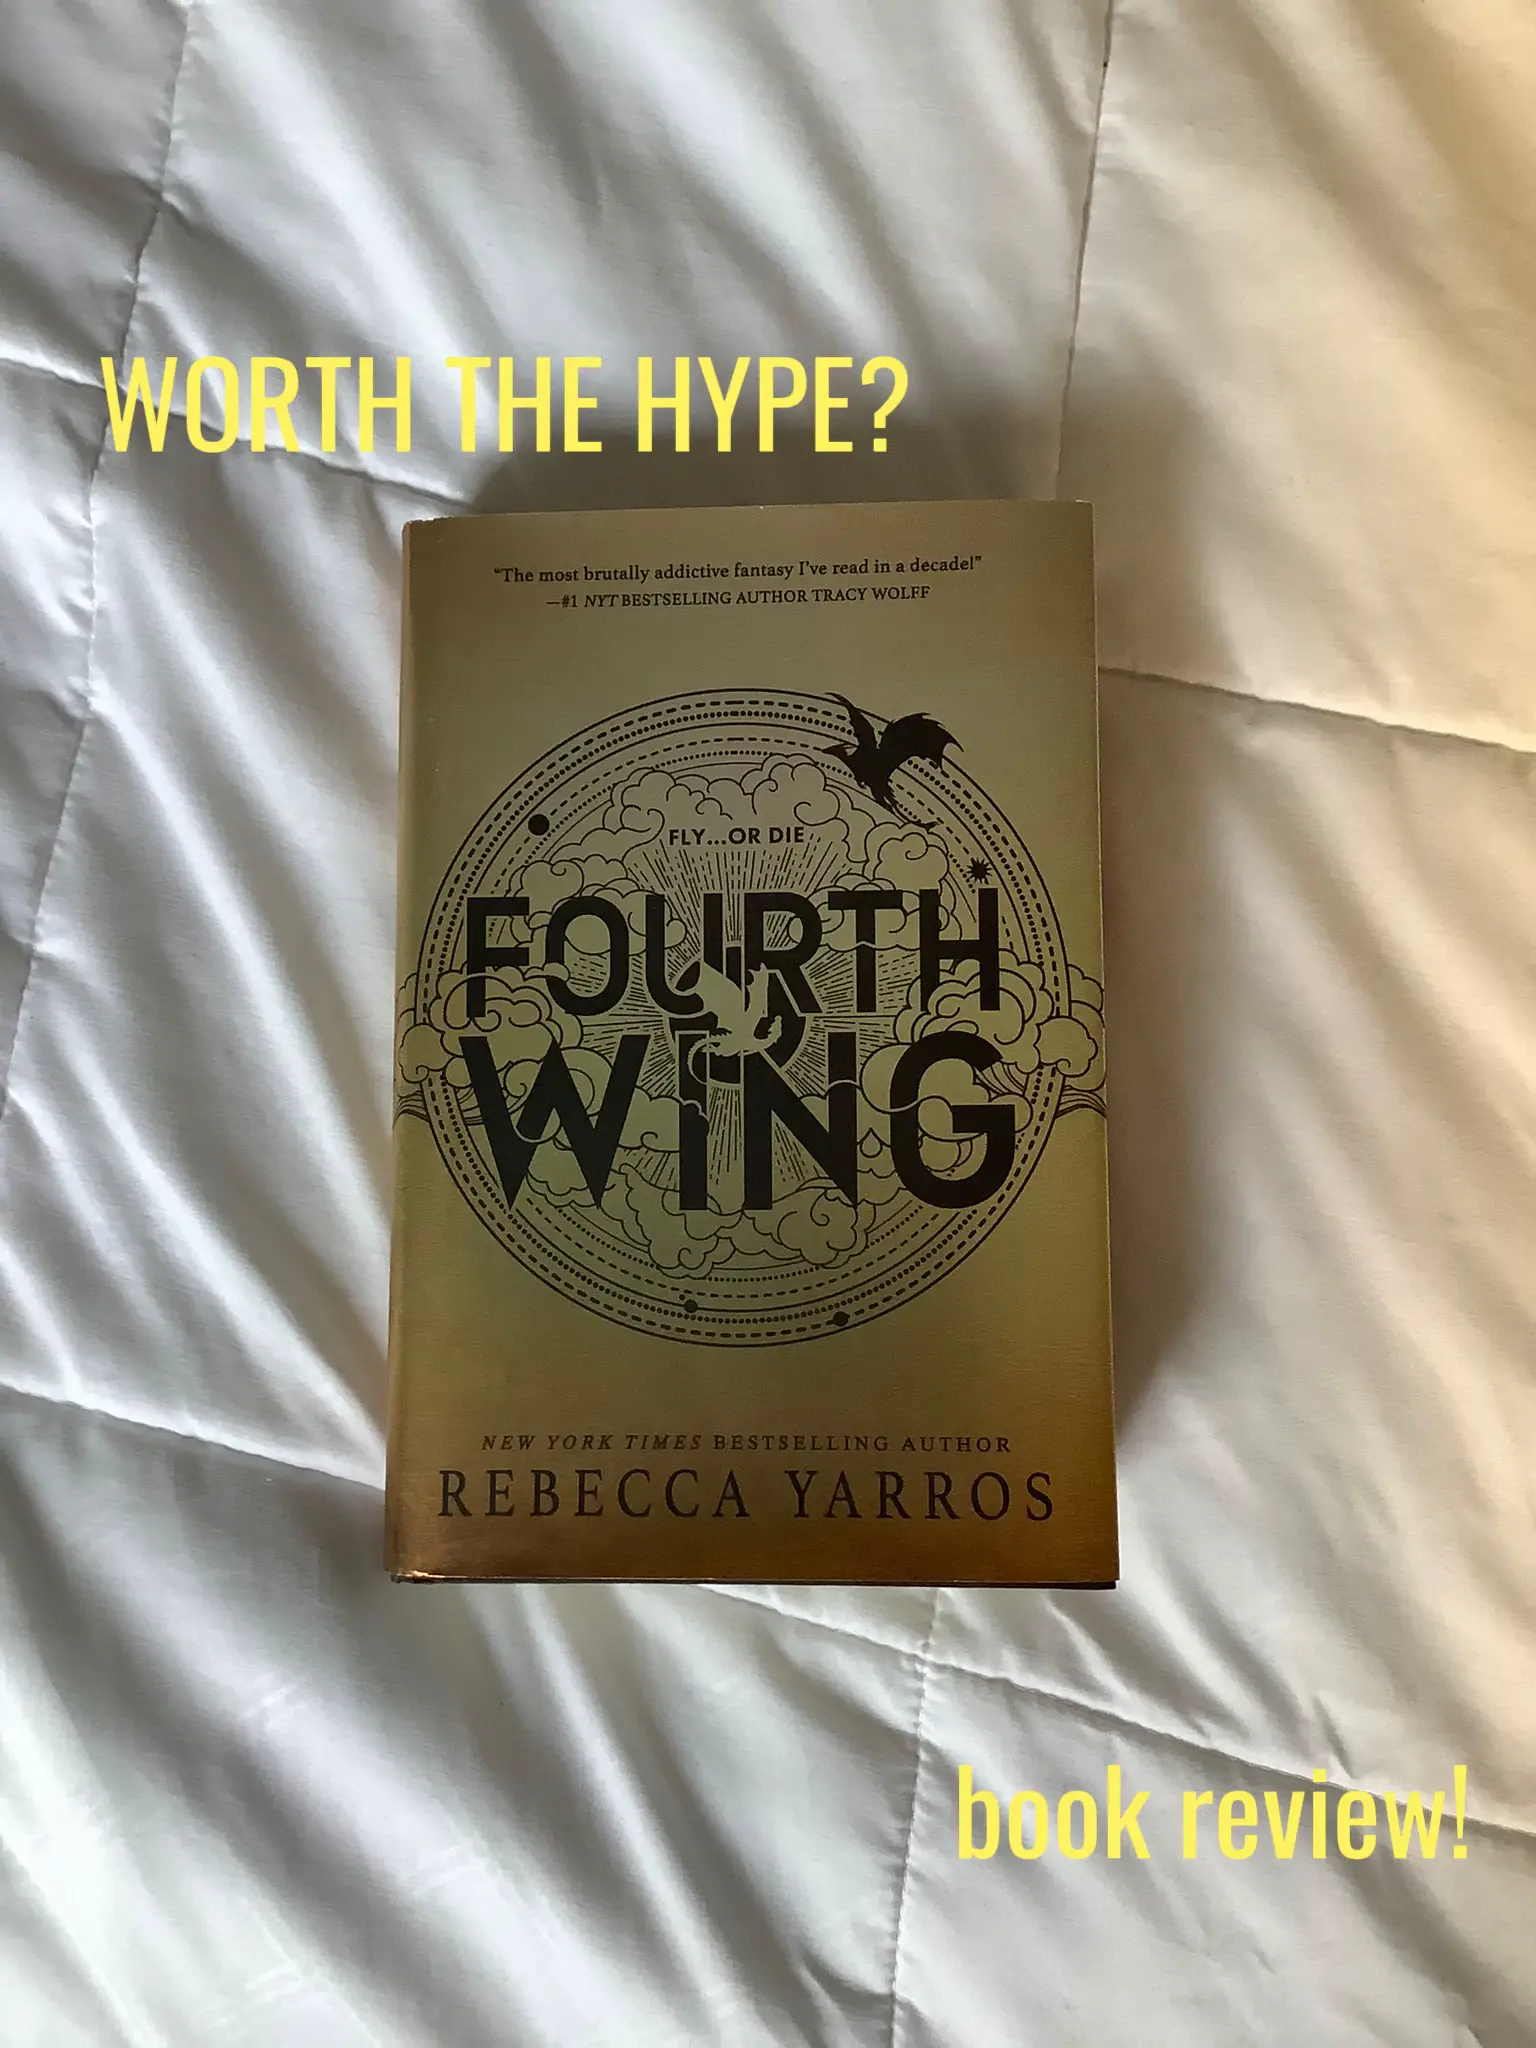 top book recommendations from fourth wing fans - Lemon8 Search